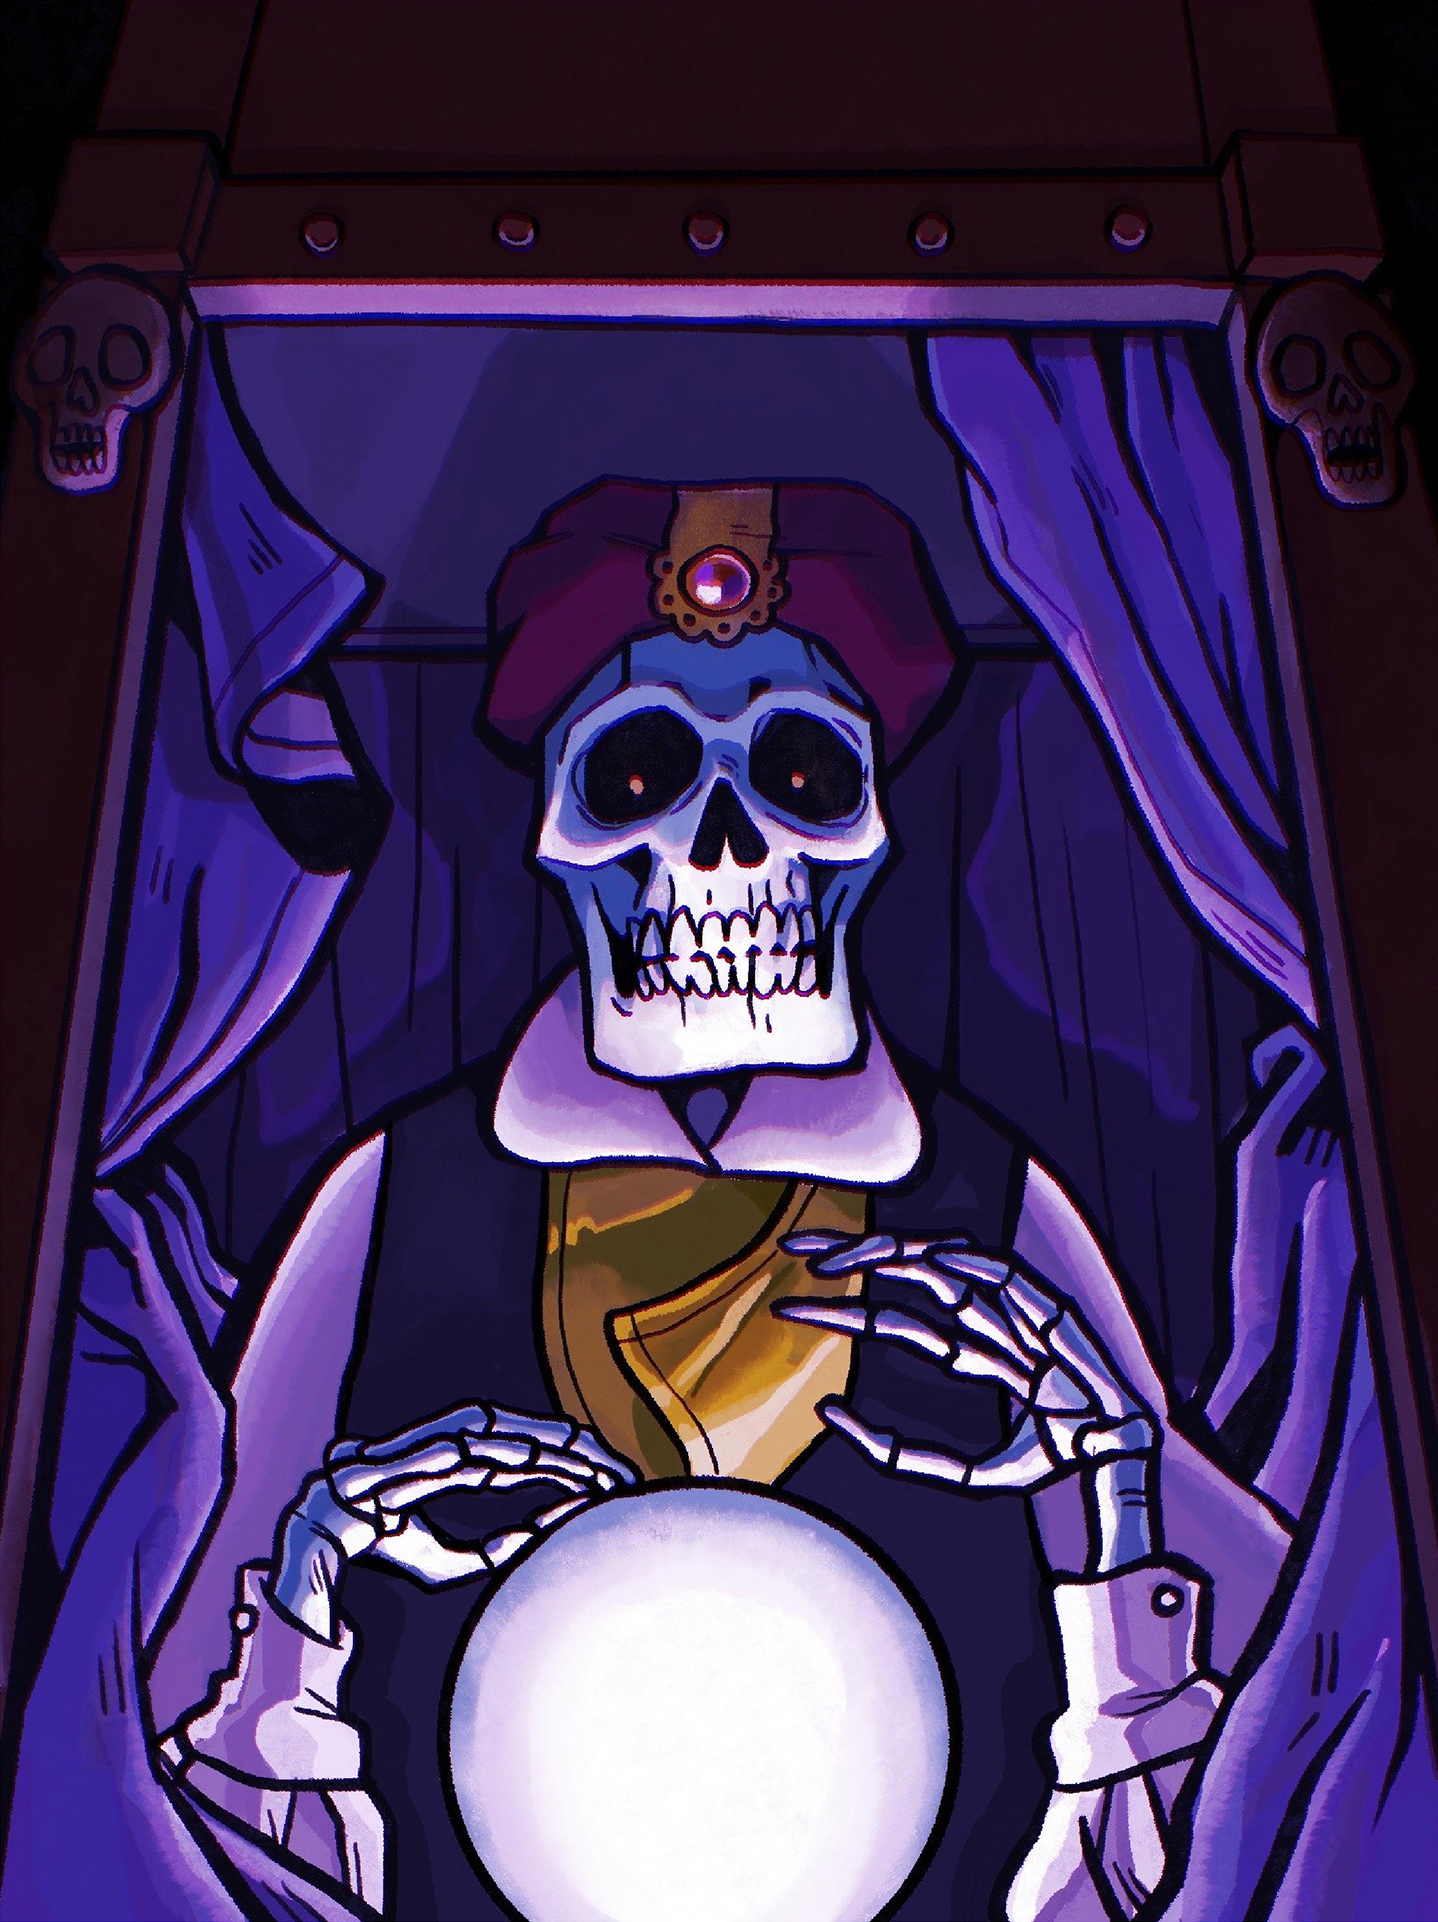 A purple-themed illustration of a skeleton acting as a fortune teller.